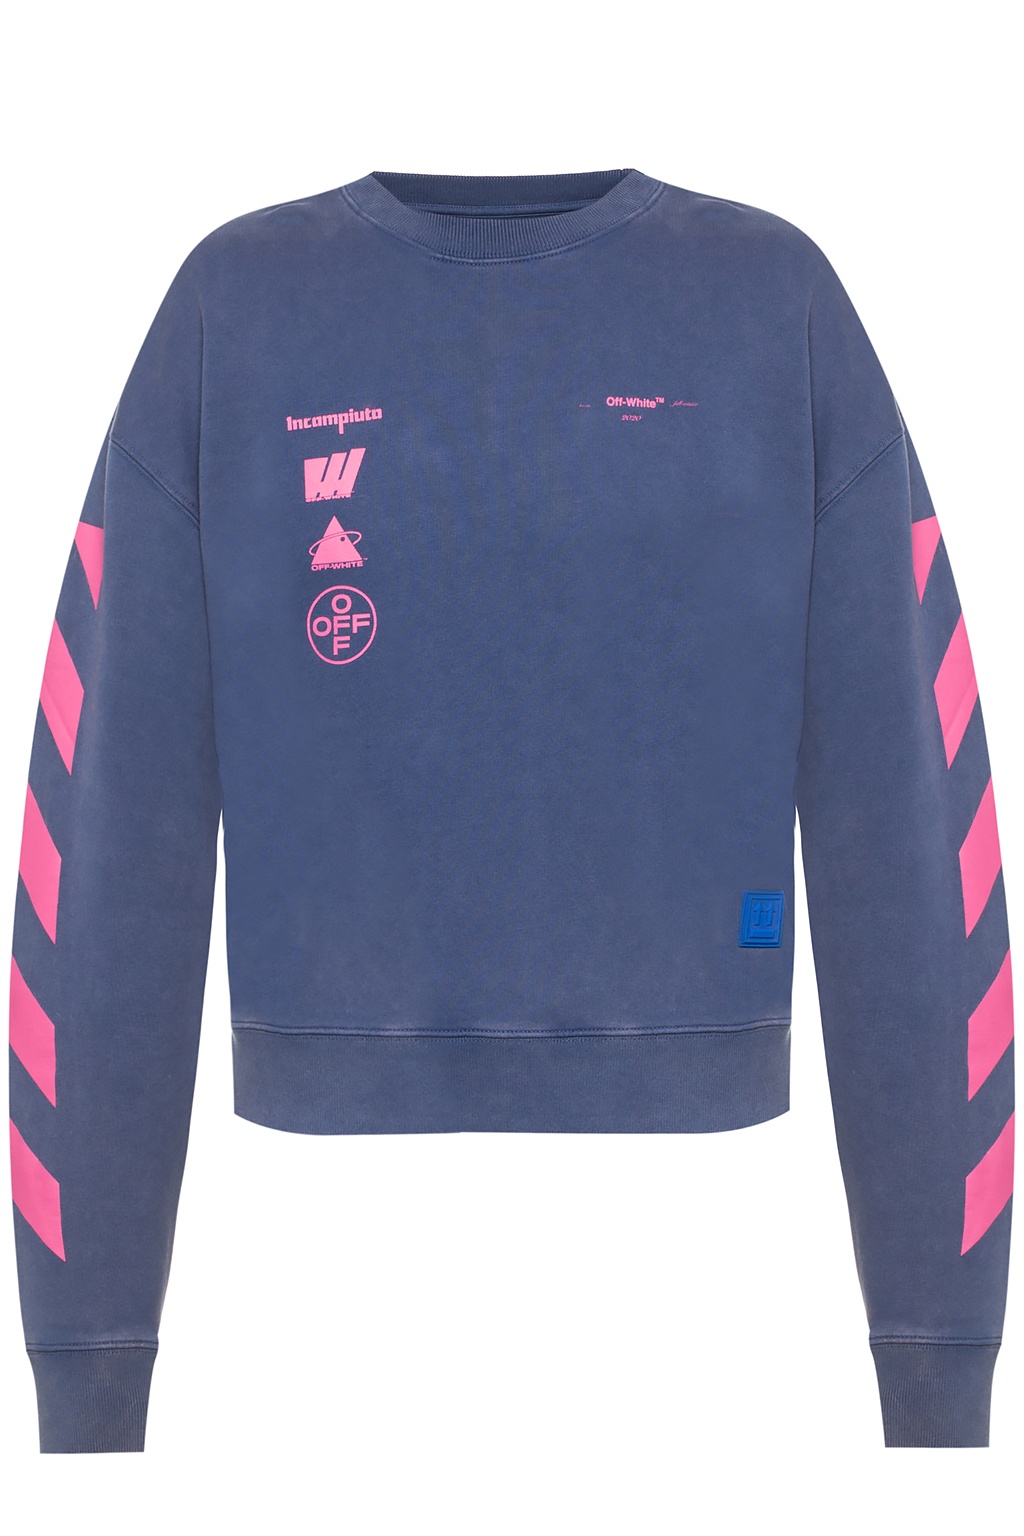 Off White Hoodie Blue And Pink - pic-flamingo